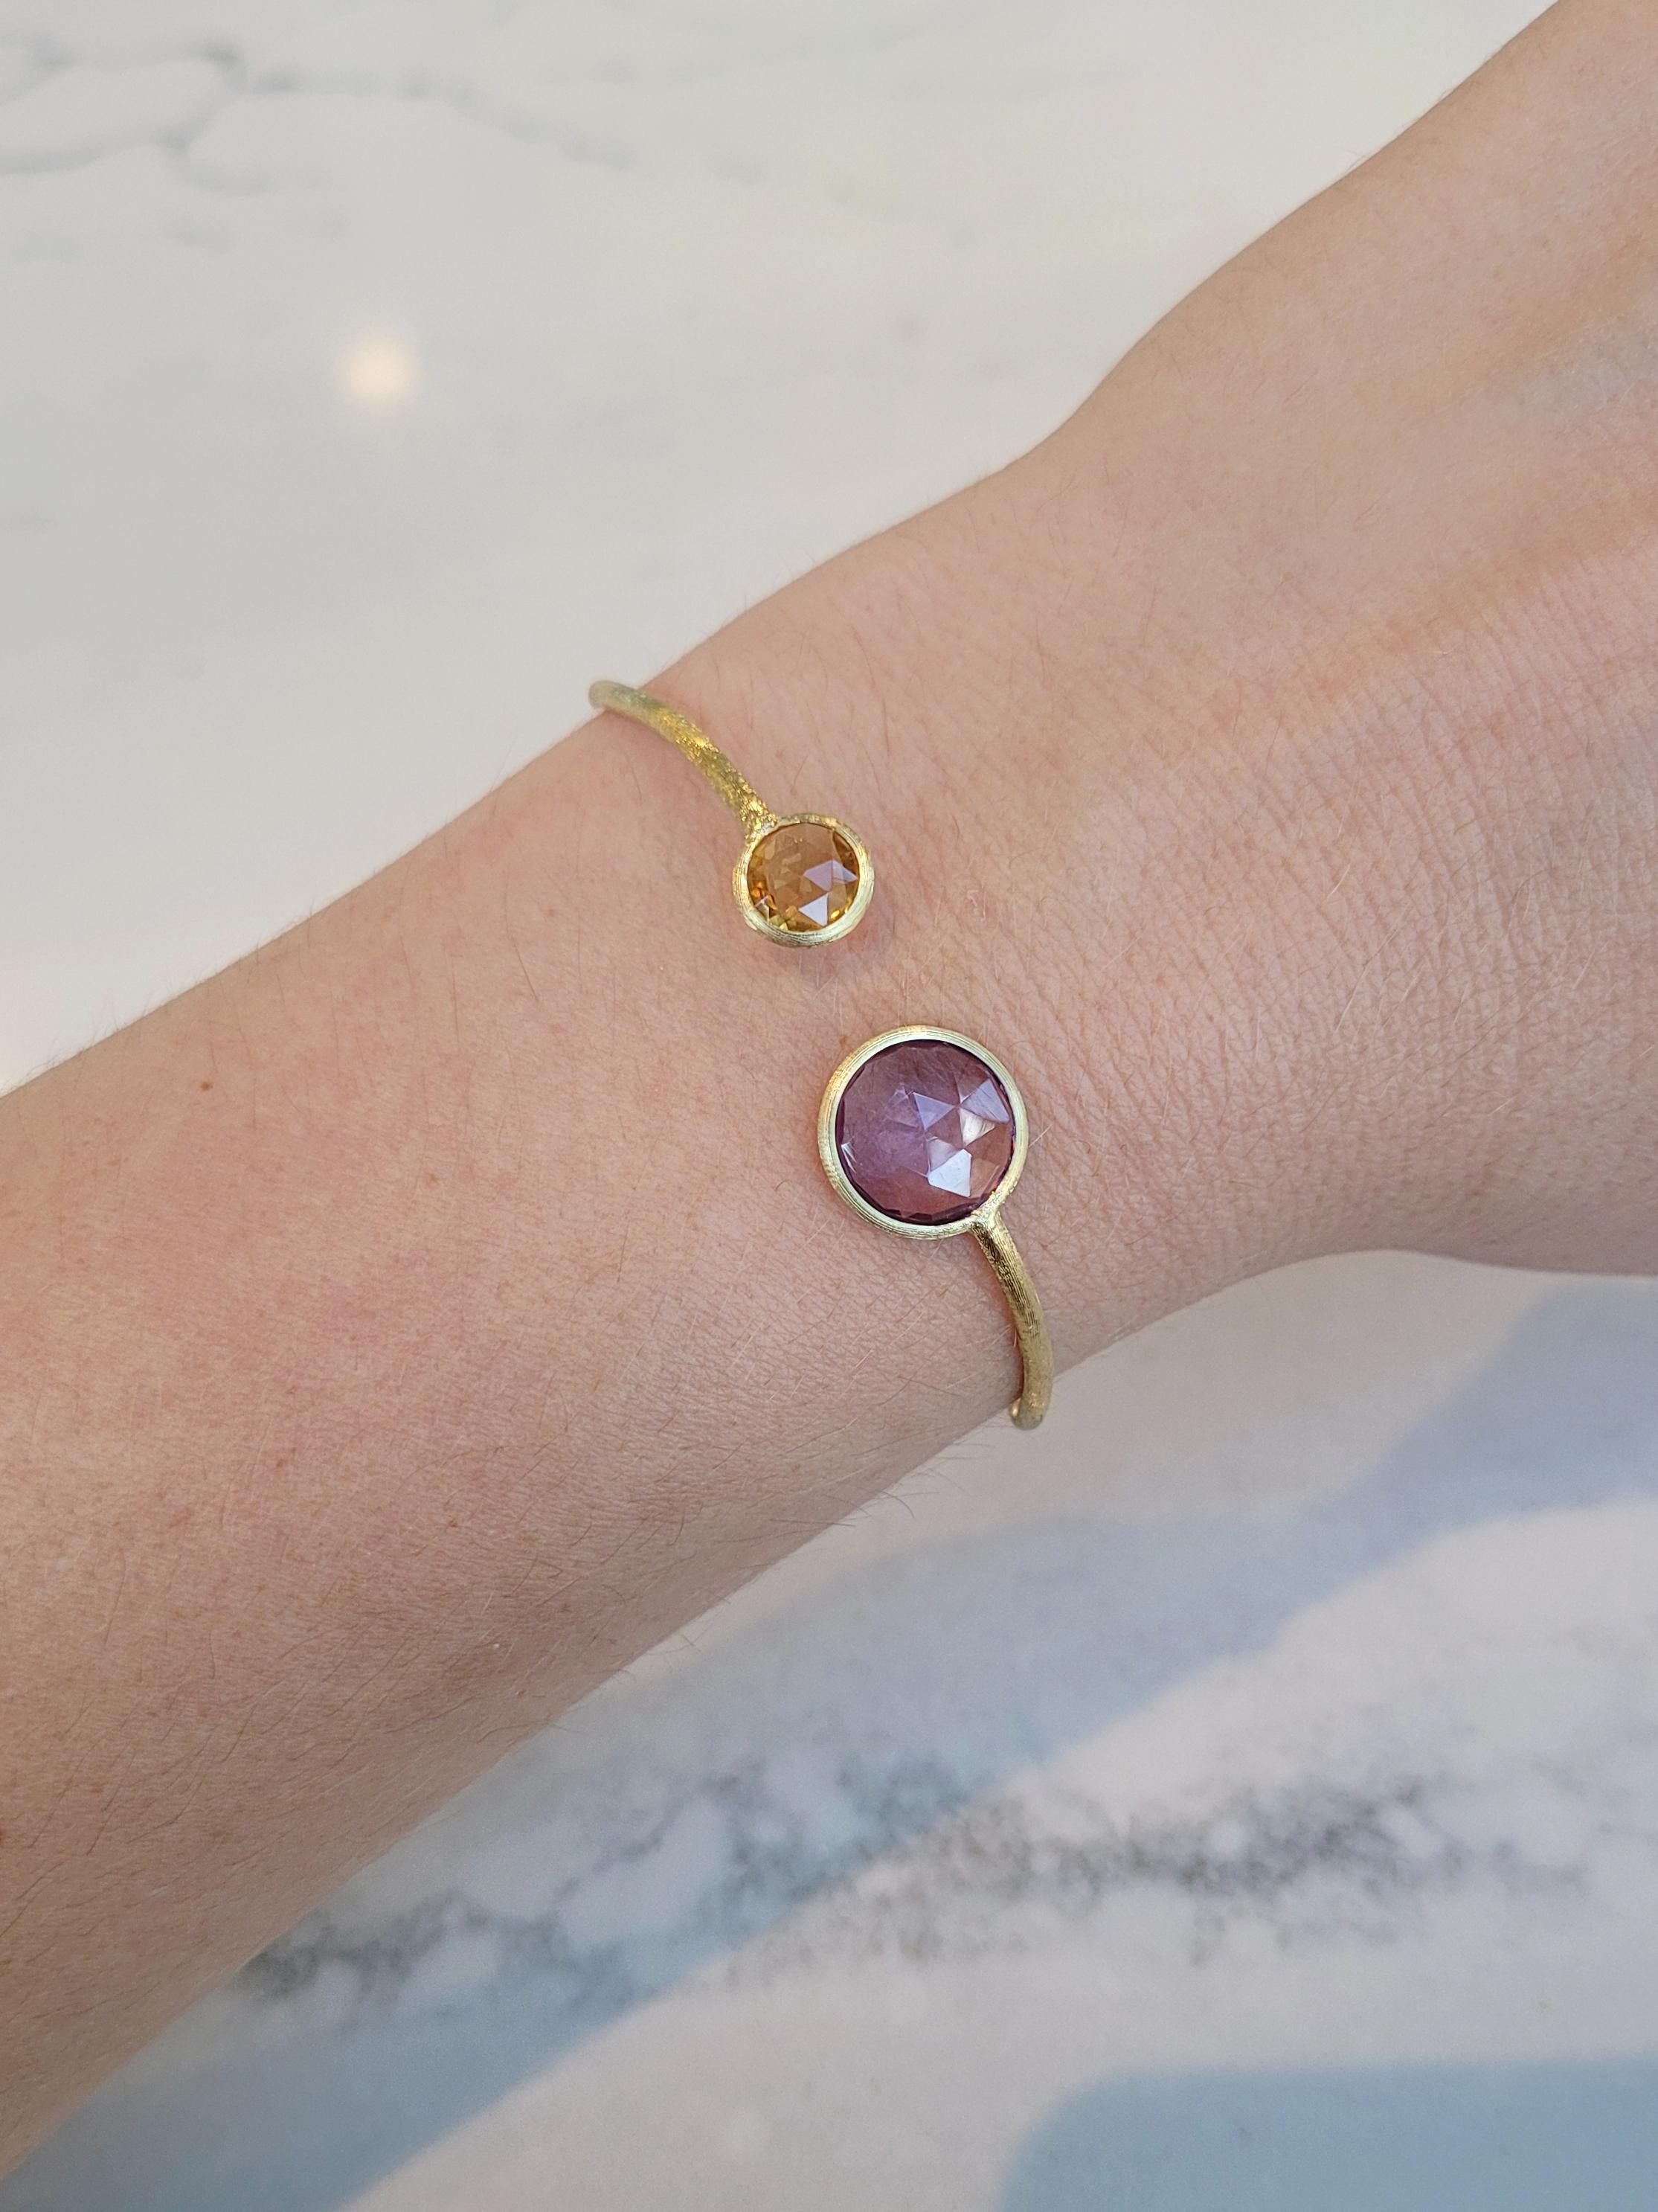 Amethyst and Citrine are set in 18K yellow gold with a trademark Marco Bicego hand-engraved finish.